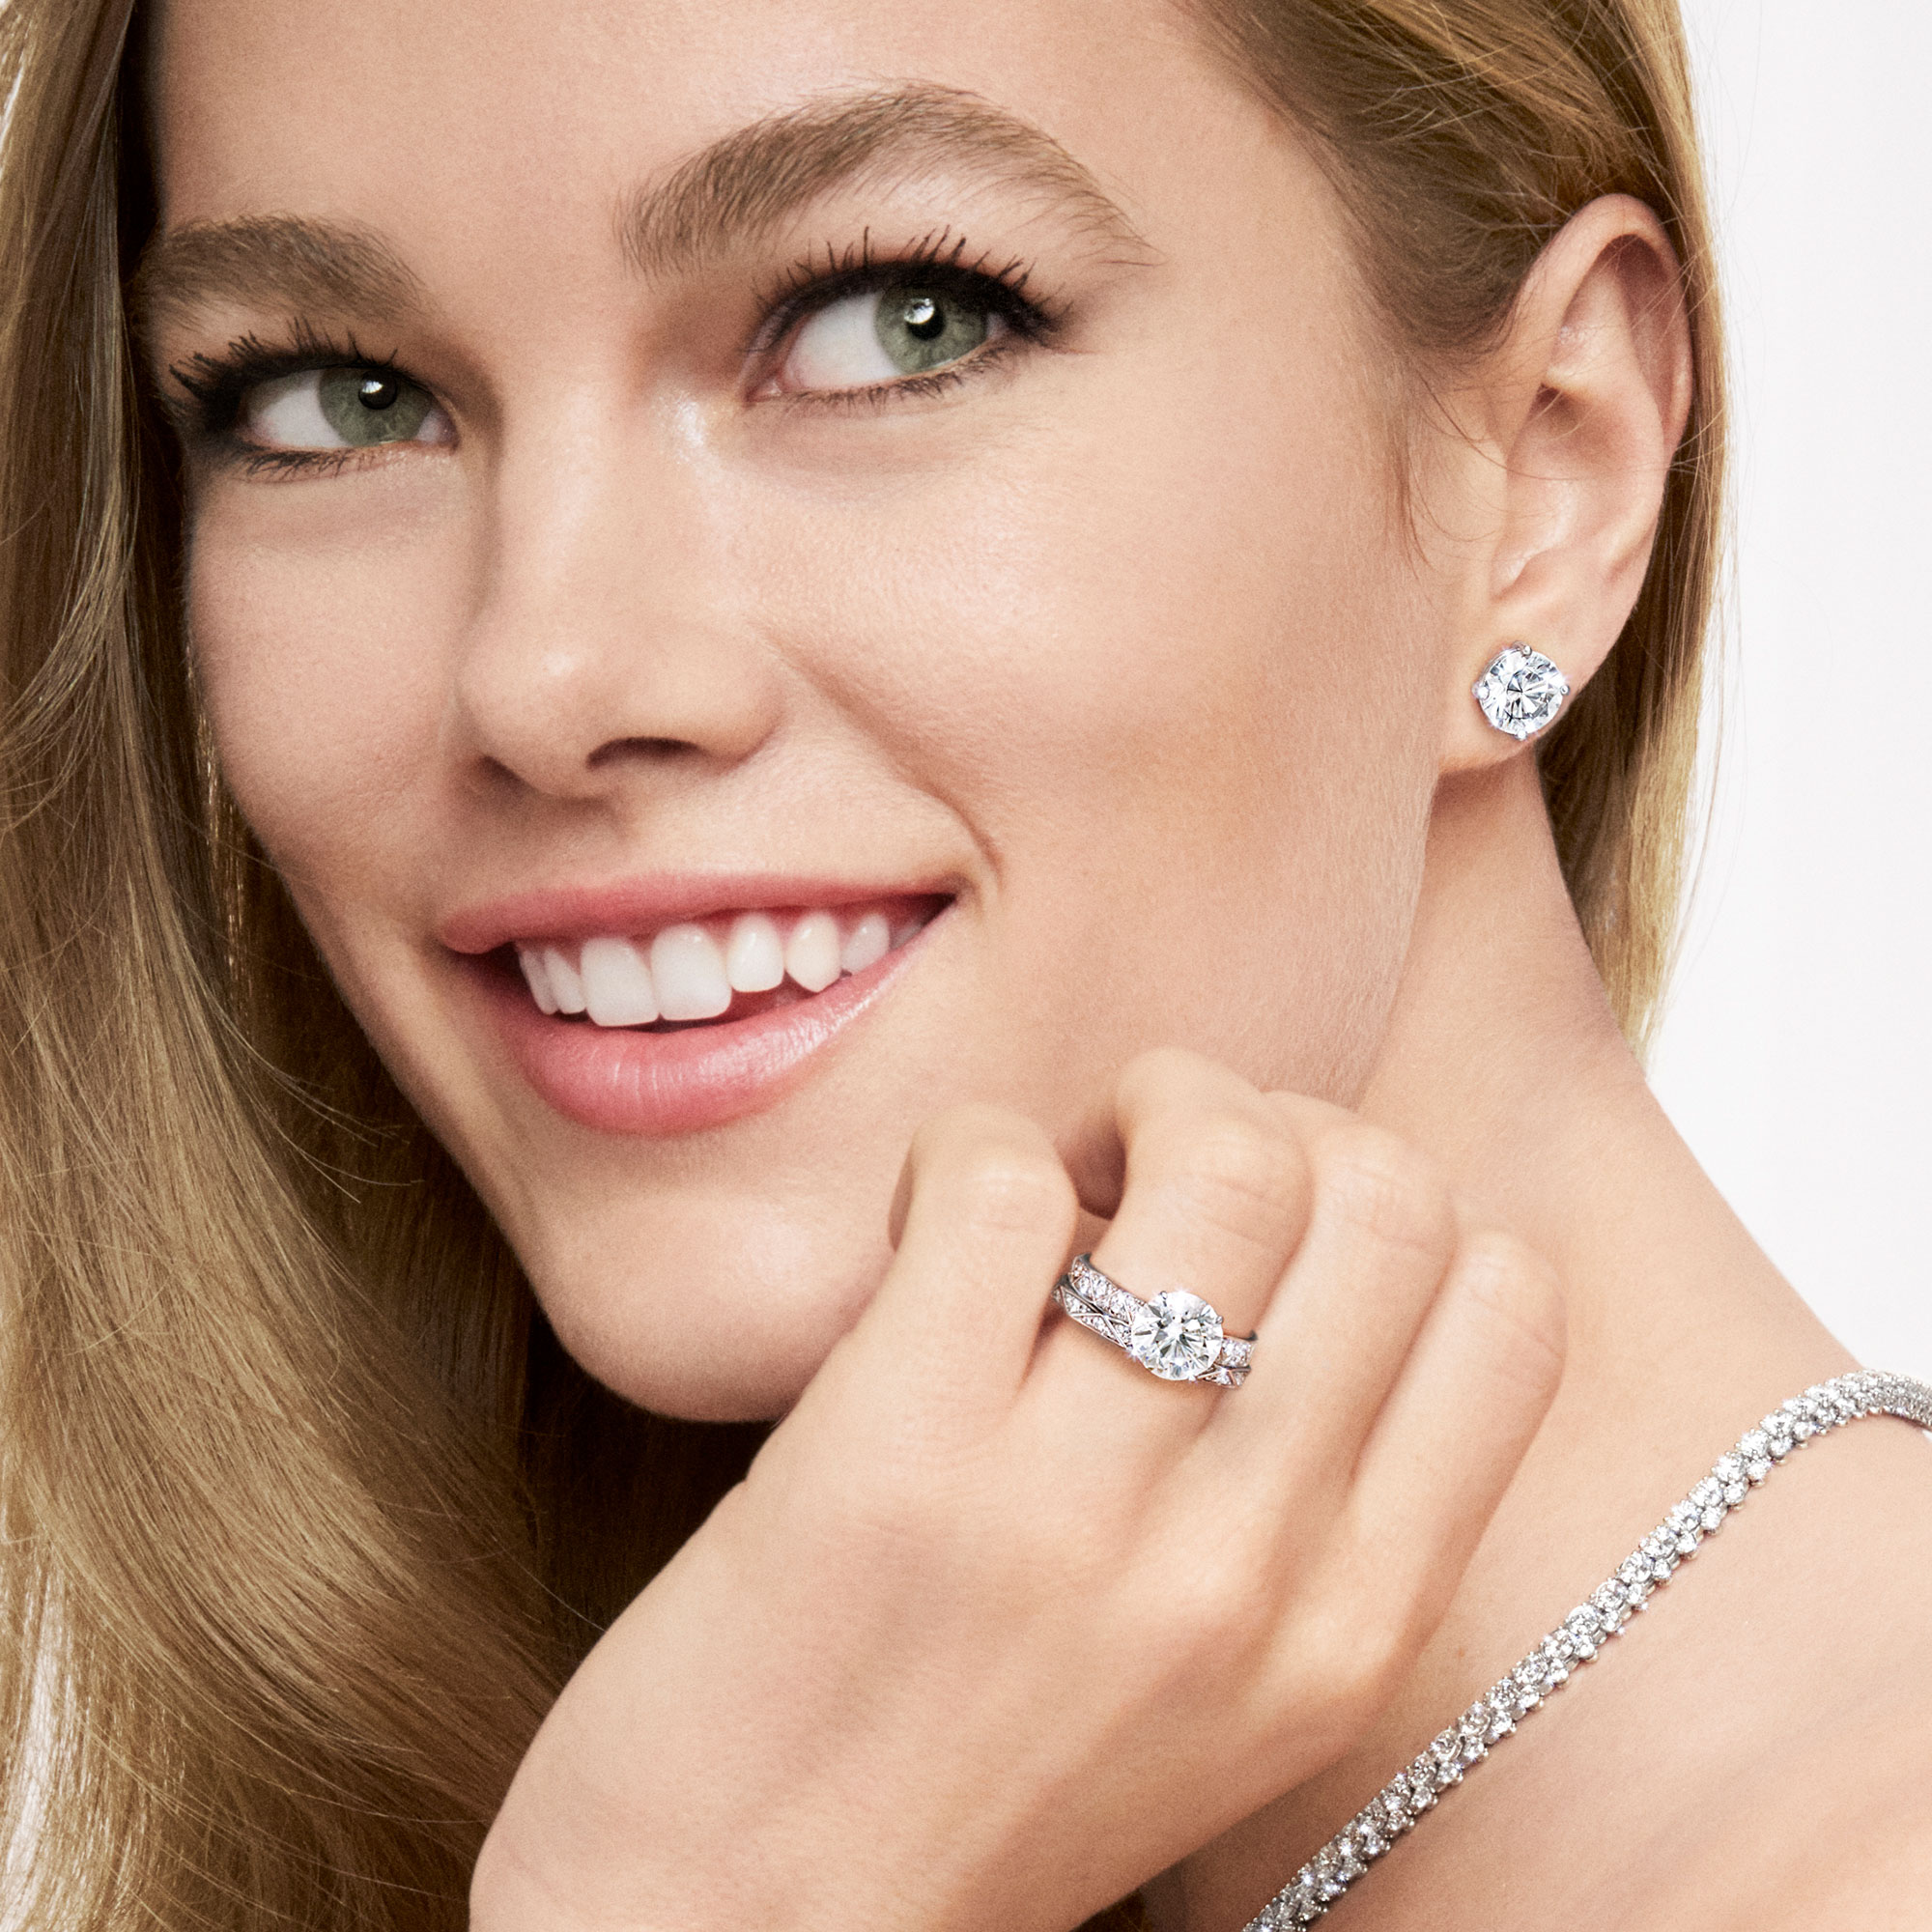 Model wearing Graff Round Diamond Stud Earrings and Laurence Graff Signature Round Diamond Engagement Ring and wessing band.